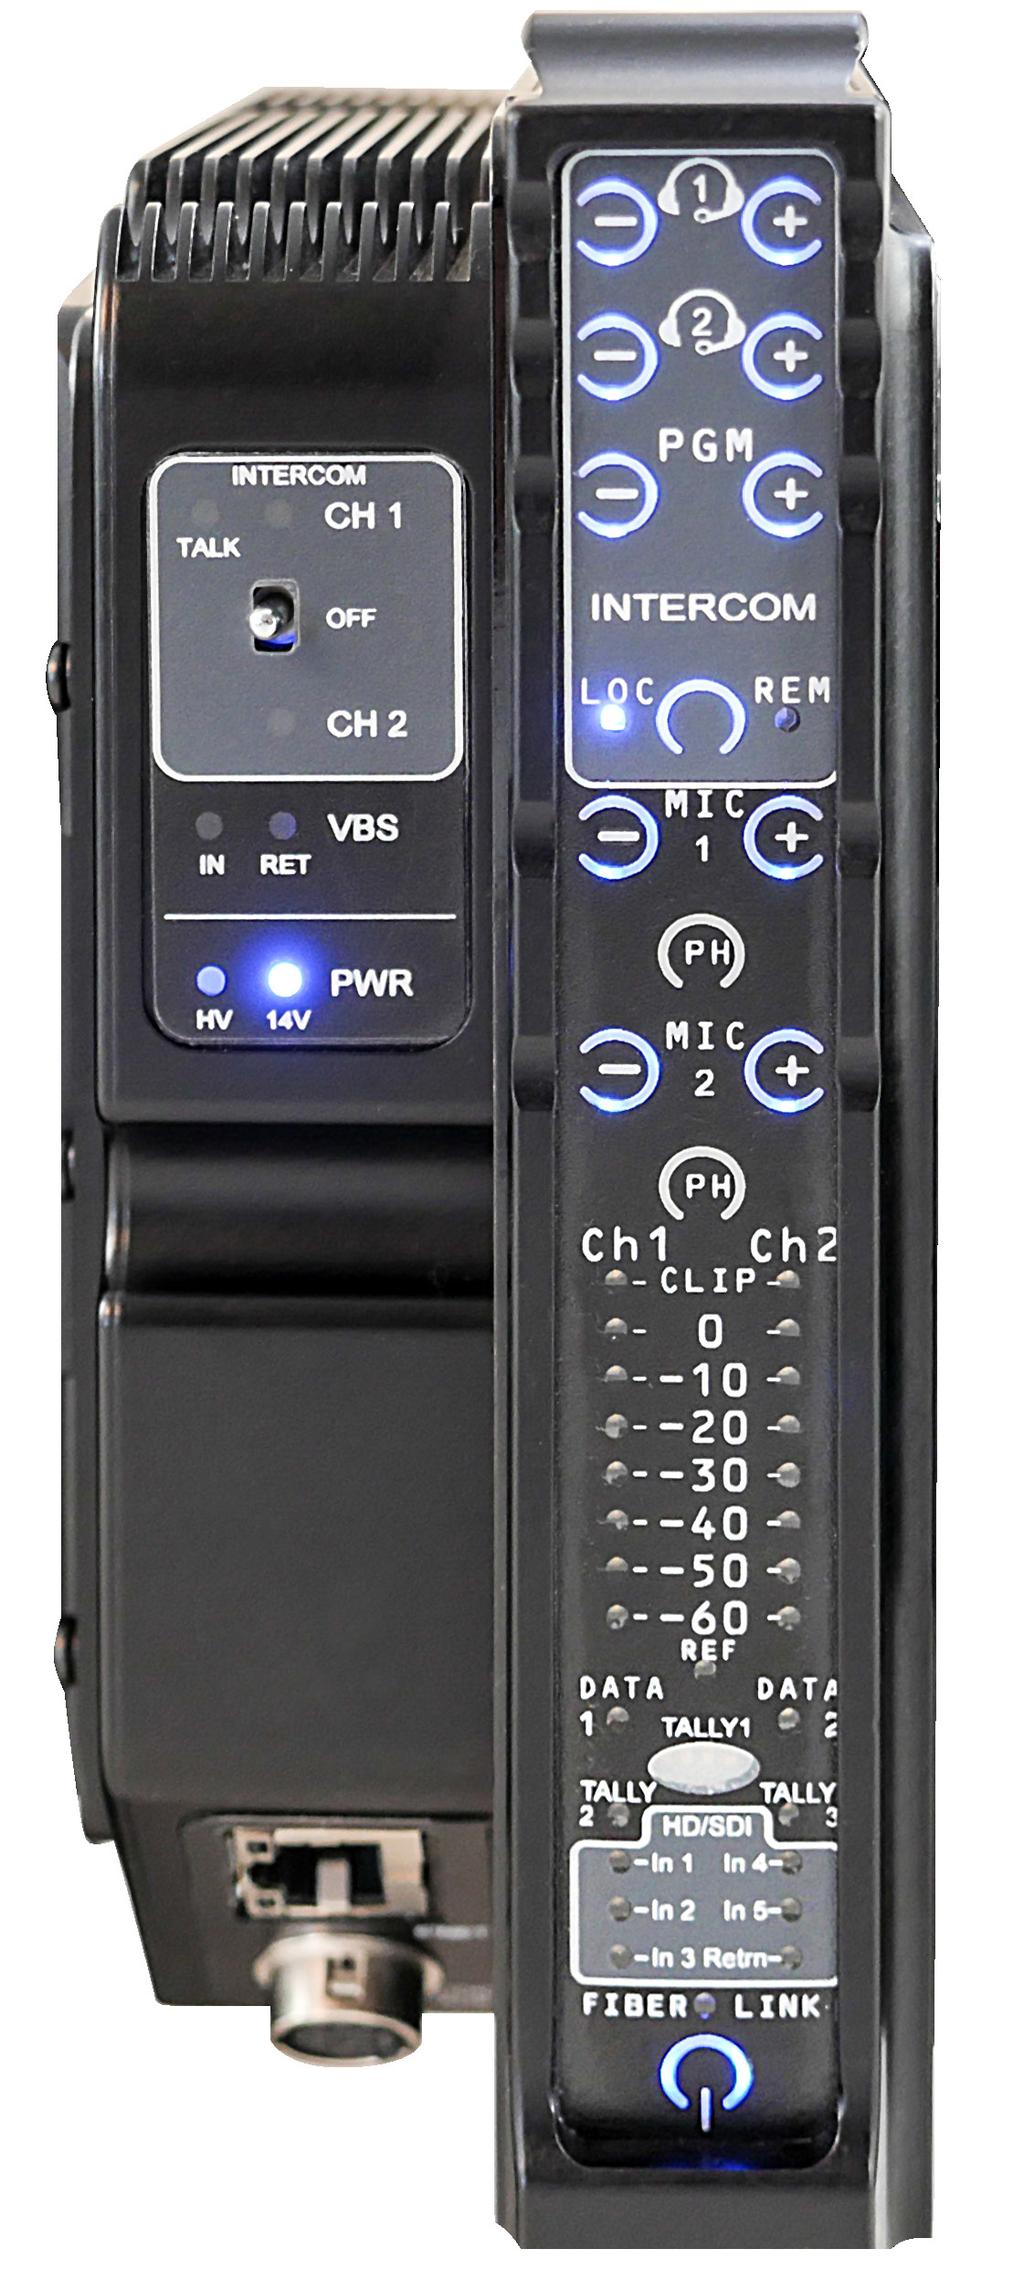 Instruction Manual, SilverBack-III Family FEATURES & OPERATION 0 Control Panel: LED Intercom and Fiber Signal Status Metering Looking at the left side of the SilverBack-III TX unit (from the back of